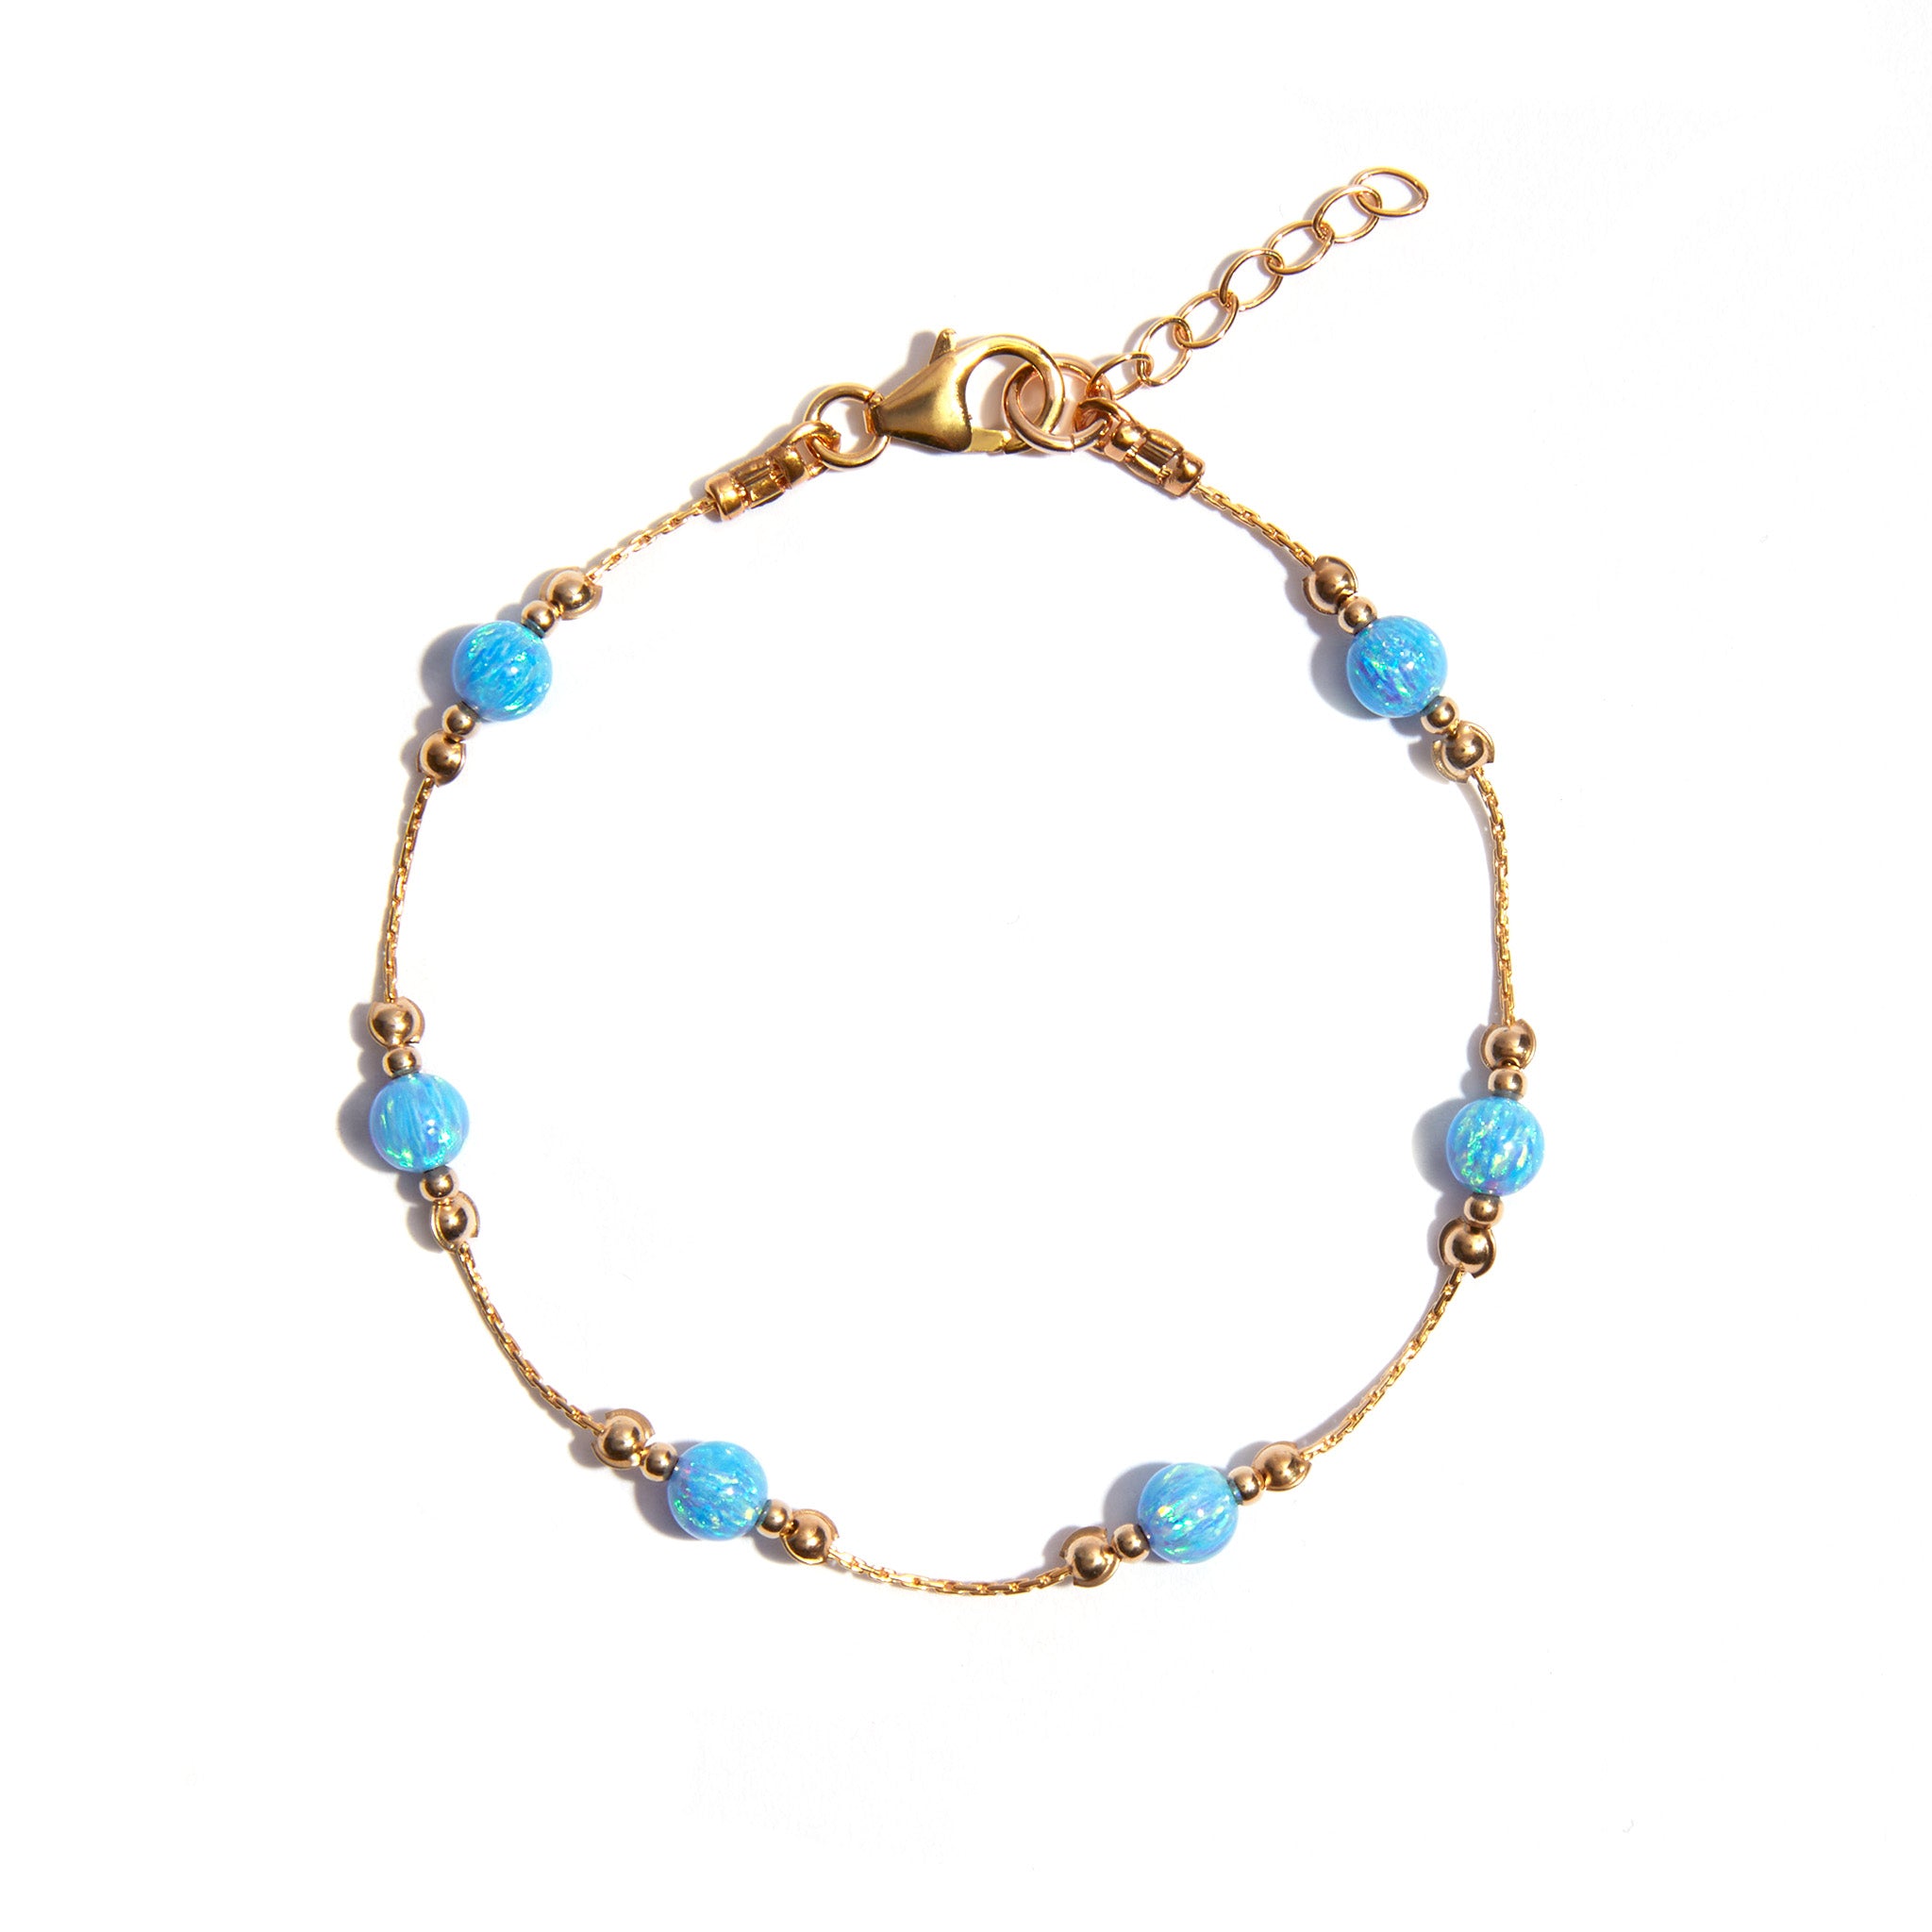 This beautiful blue opal bracelet is crafted with a stunning lab blue opal pendant strung on an 7 inch 14ct gold filled chain. It is perfect for a night out or for day to day wear and is sure to accent your wardrobe in style.